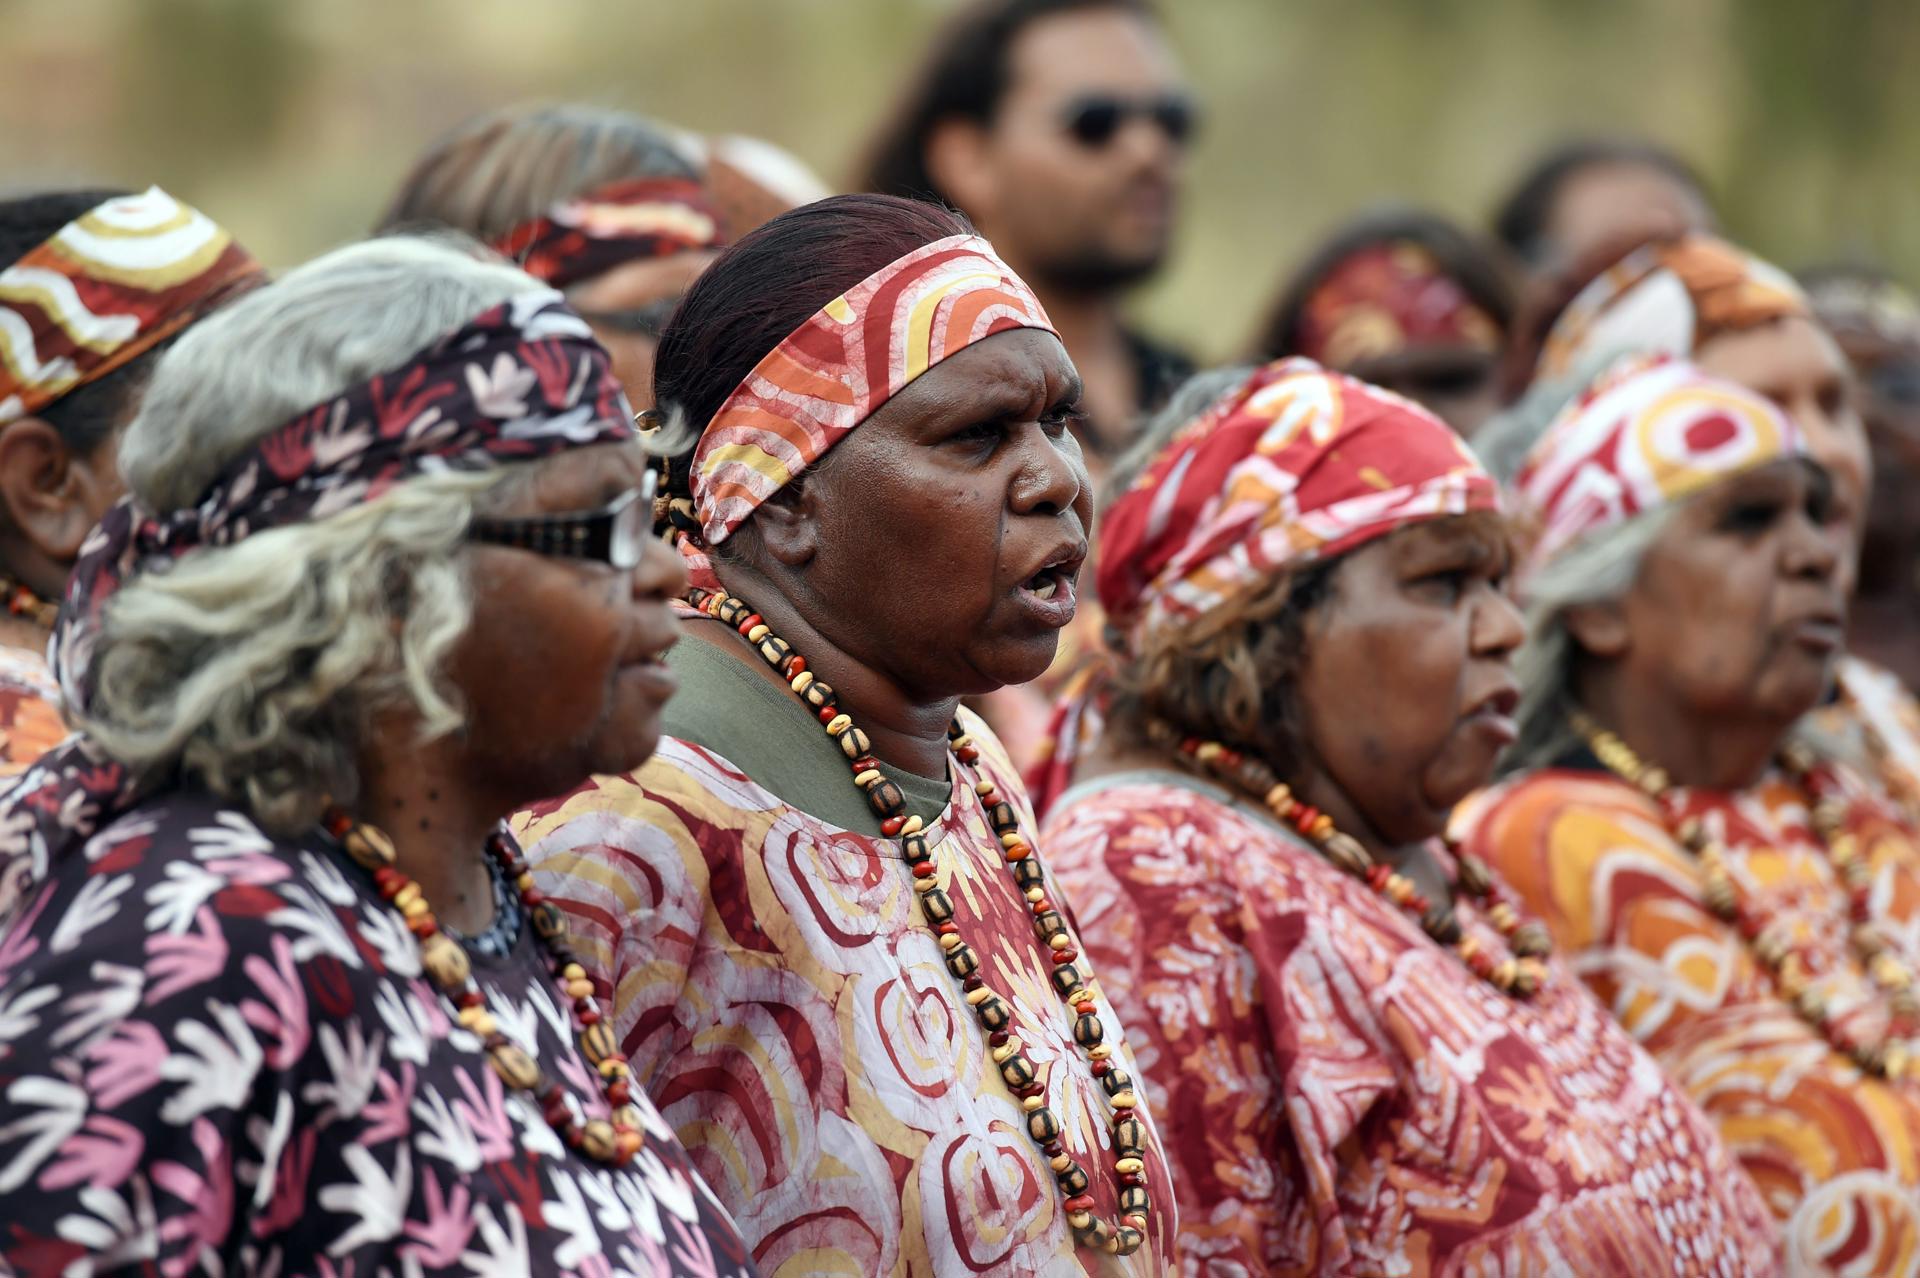 A picture made available on 26 October 2015 shows members of the Central Australian Women's Choir performing at a cultural event near Uluru, also known as Ayres Rock, in the Northern Territory, Australia, 25 October 2015. EFE-EPA/DAN PELED AUSTRALIA AND NEW ZEALAND OUT[AUSTRALIA AND NEW ZEALAND OUT]/FILE
